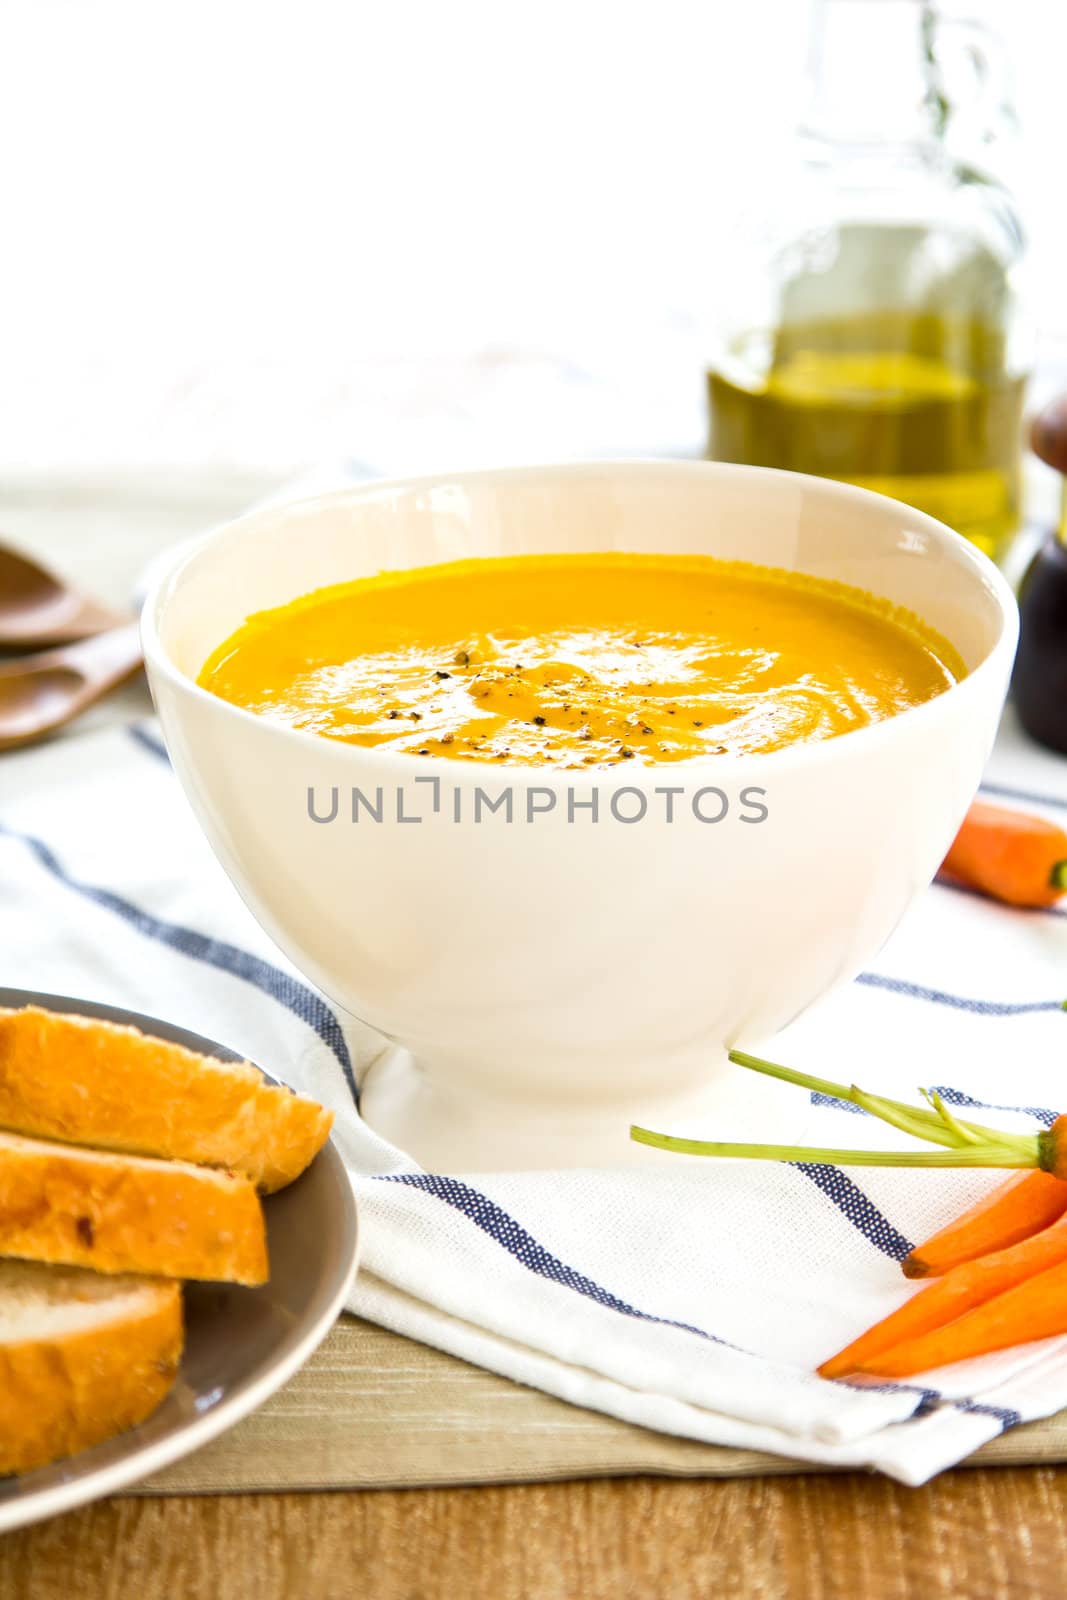 Carrot soup with some pieces of bread by baby carrot